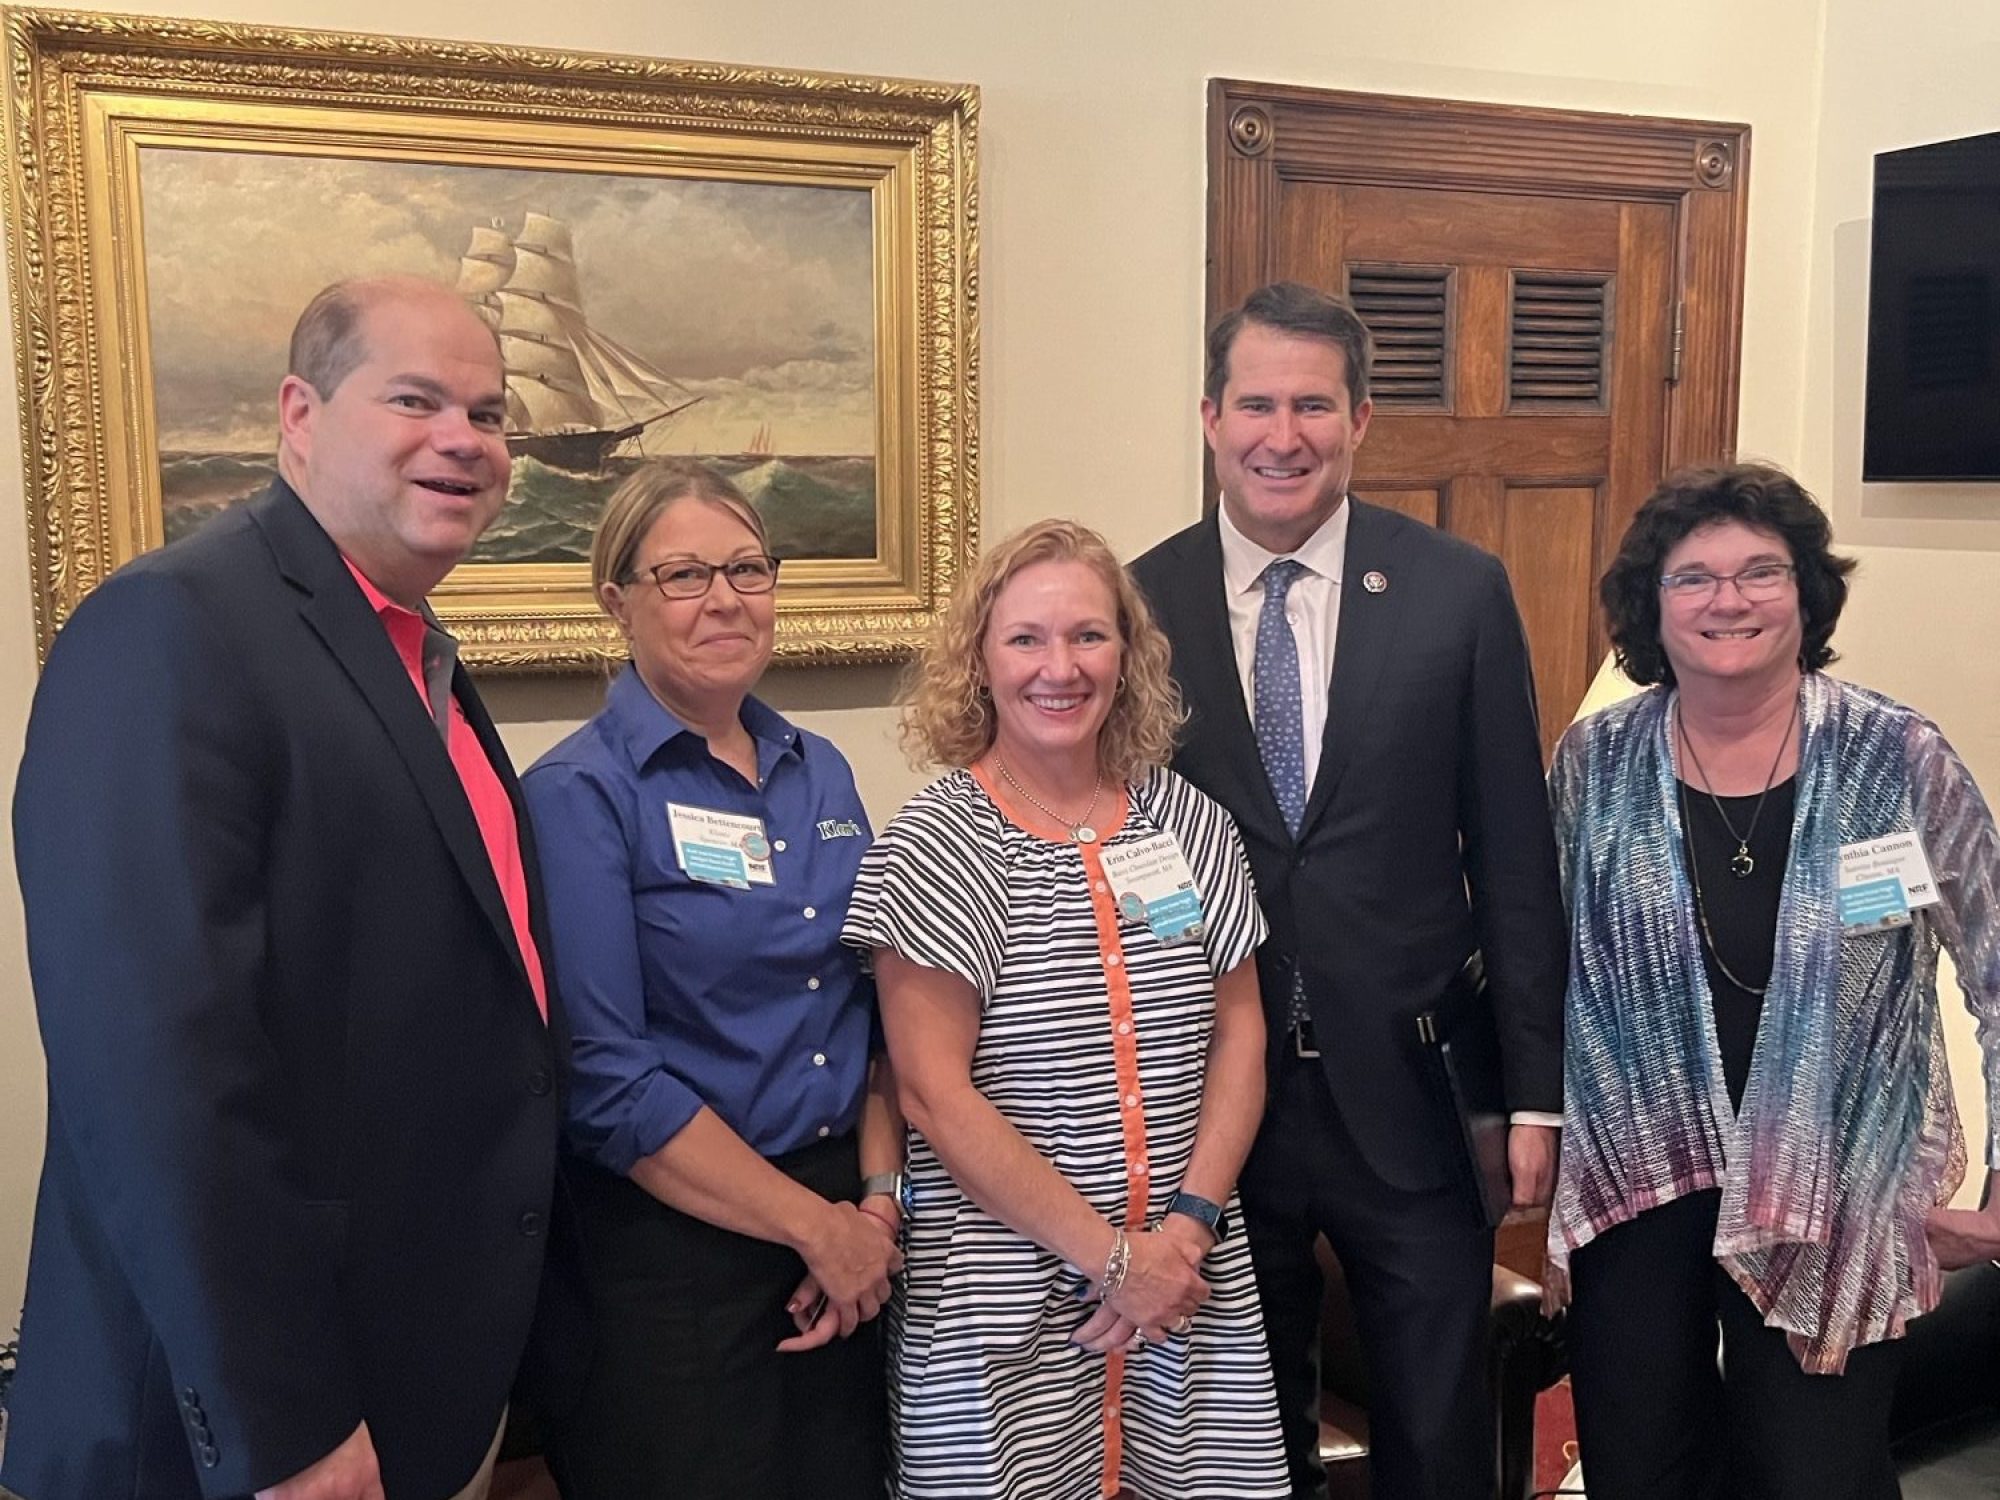 Erin Calvo-Bacci with Seth Moulton and others